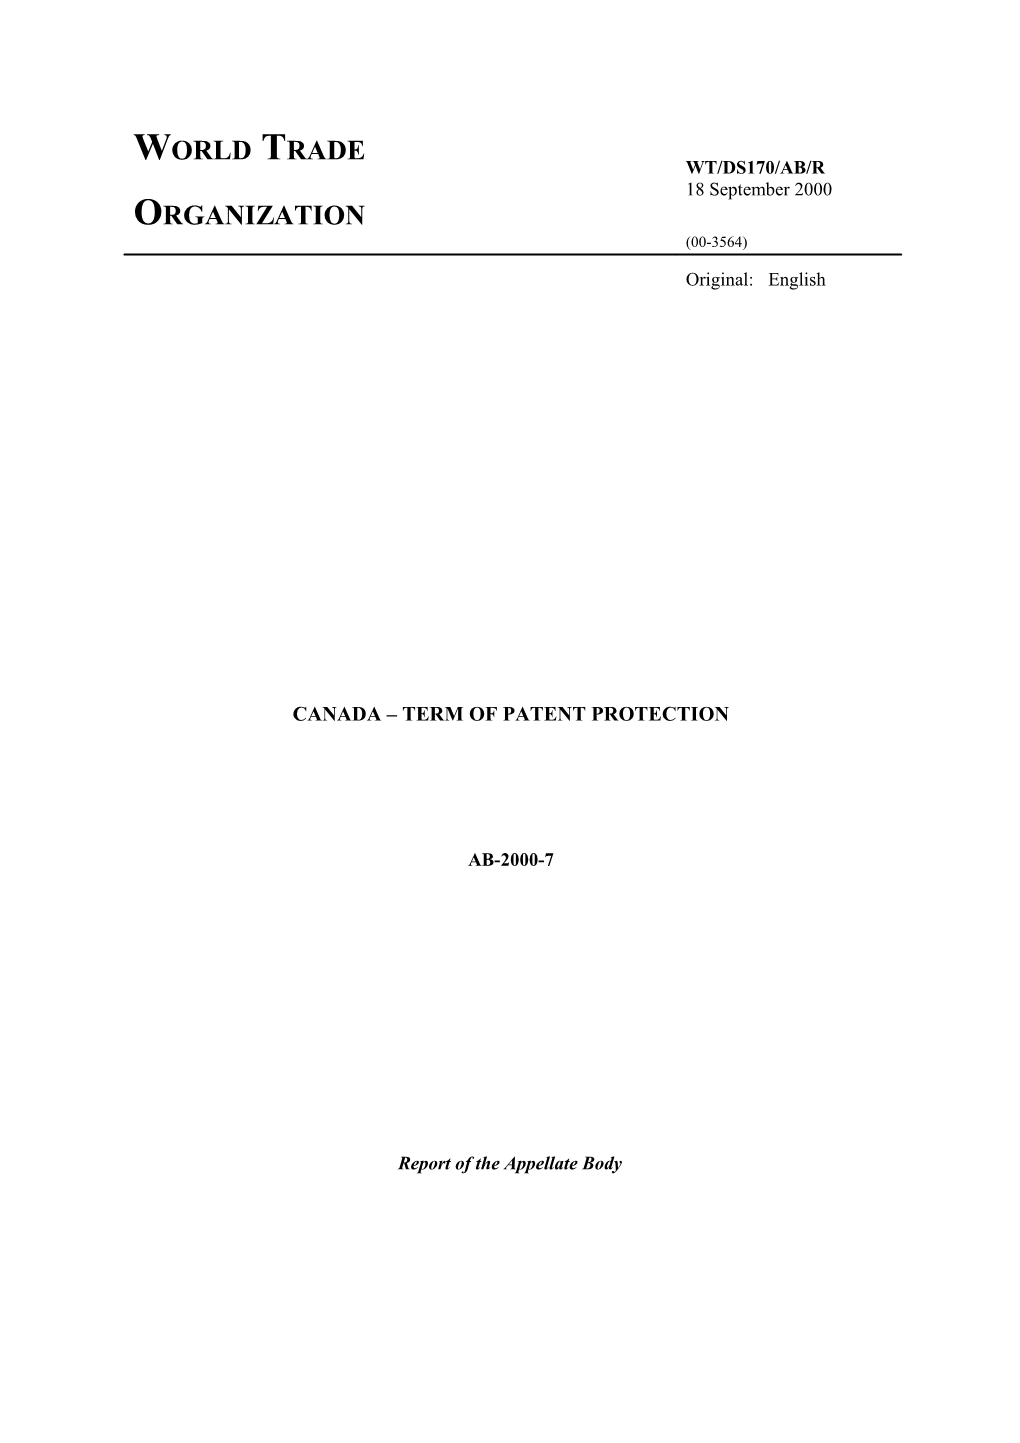 Canada Term of Patent Protection